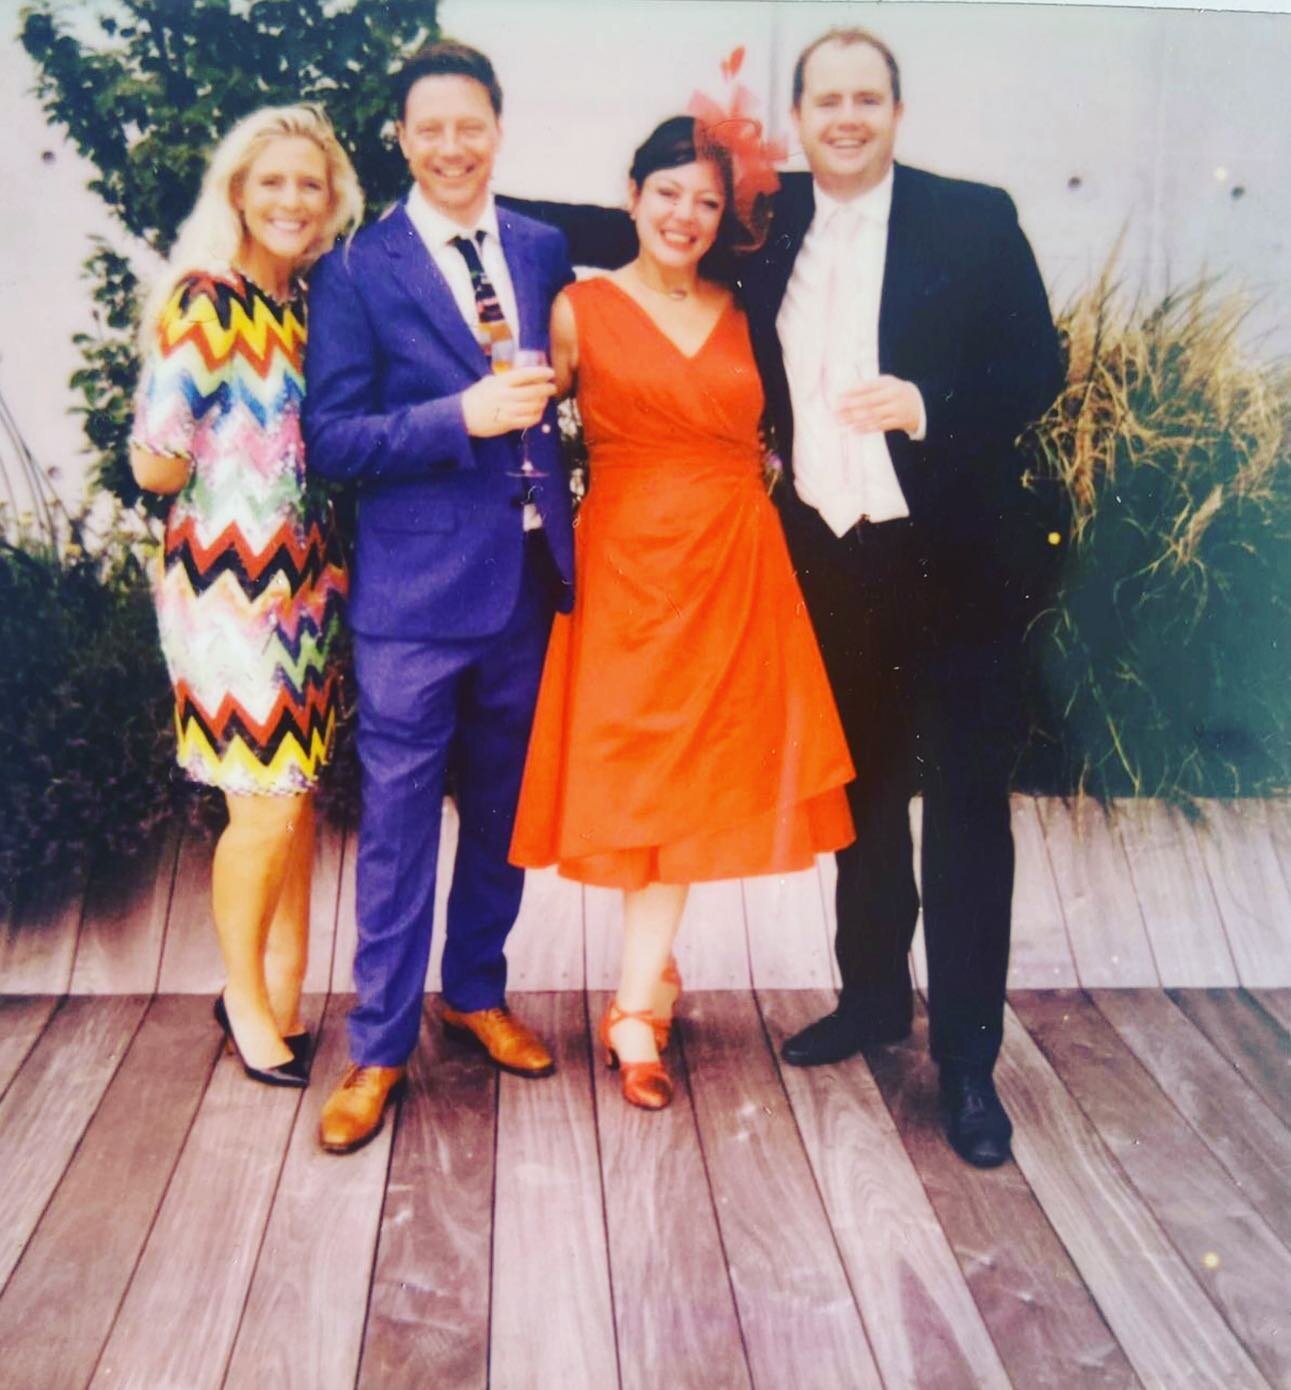 One year ago today was one of the happiest. Wedding the beautiful, clever, talented, inspiring and wise @justinjhibbs hosted by our incredible and generous friends Prue Freeman and Tom Onions @daisygreencollection 🙏🏻💕🙏🏻🎉
Thank you to sweetheart